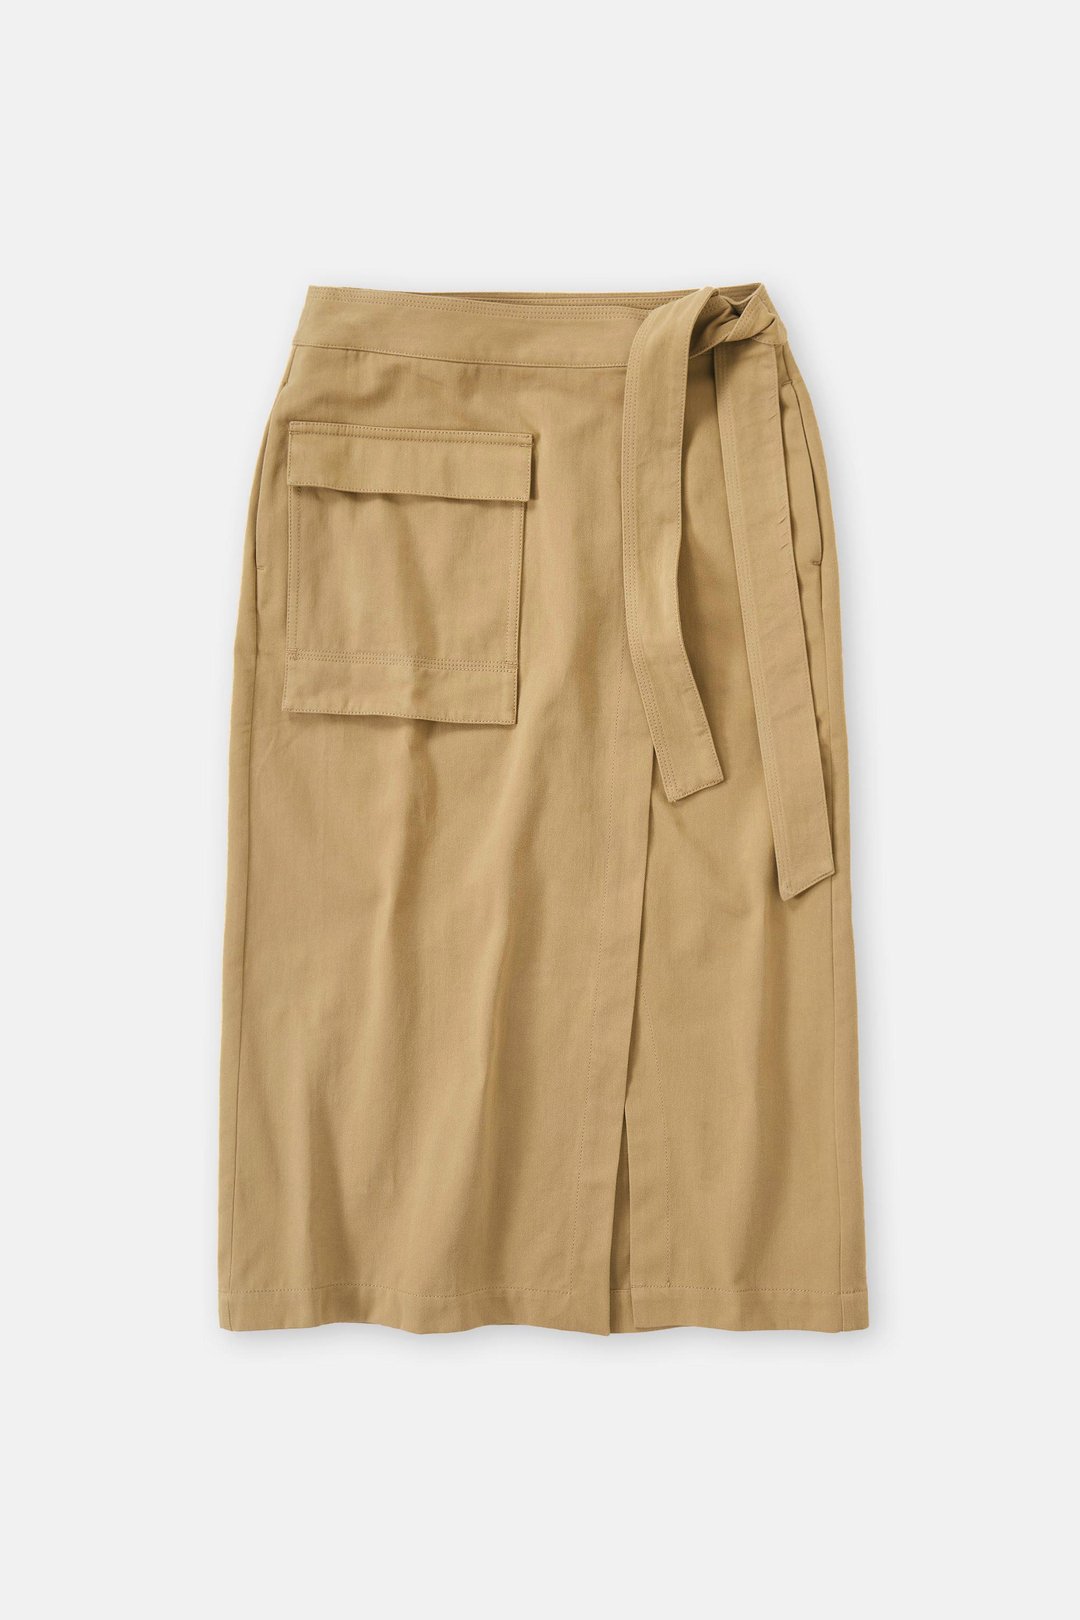 WRAP SKIRT - TAUPE BEIGE